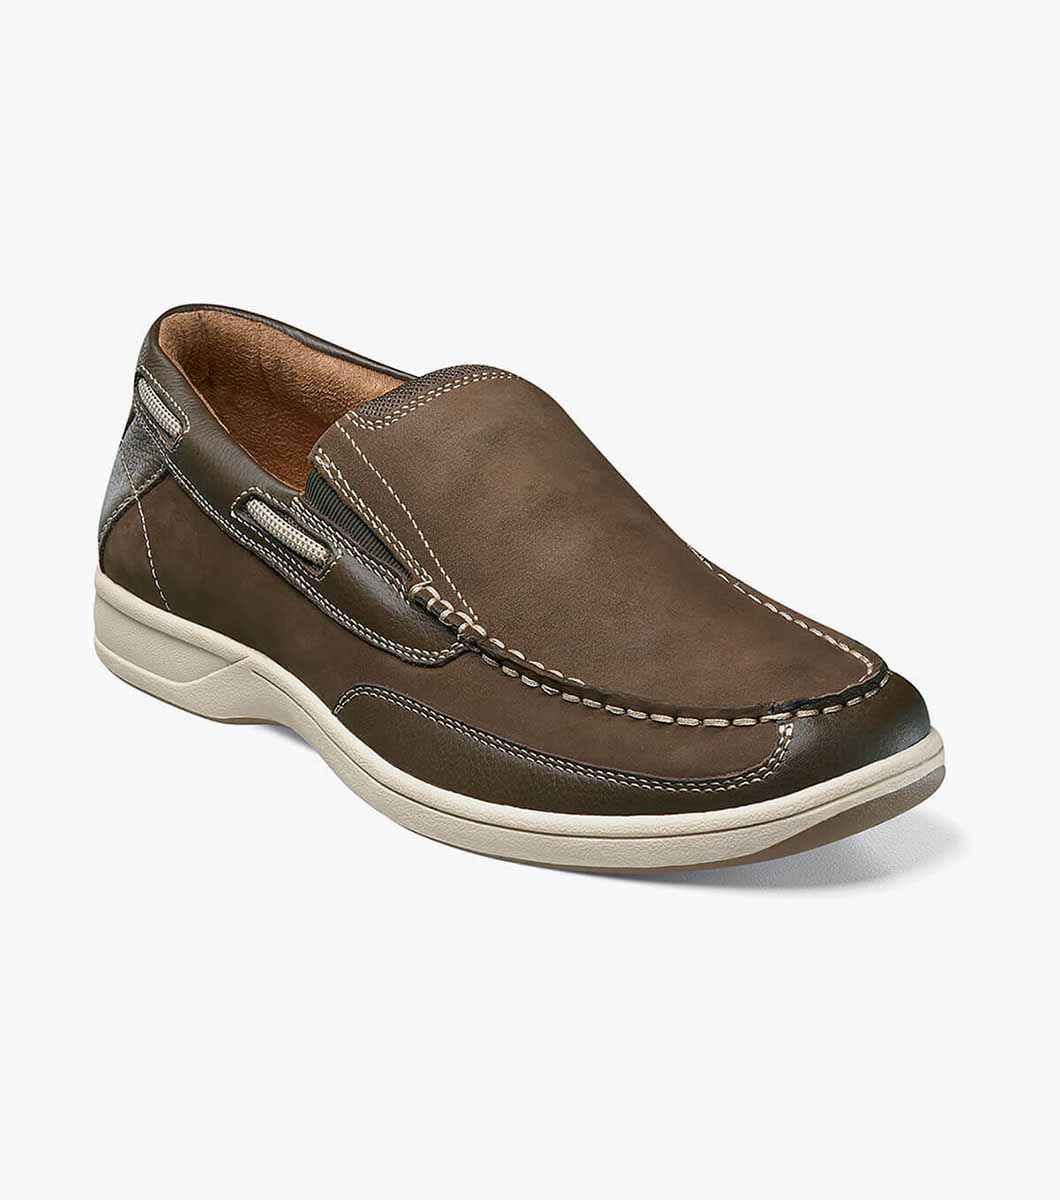 boat casual shoes